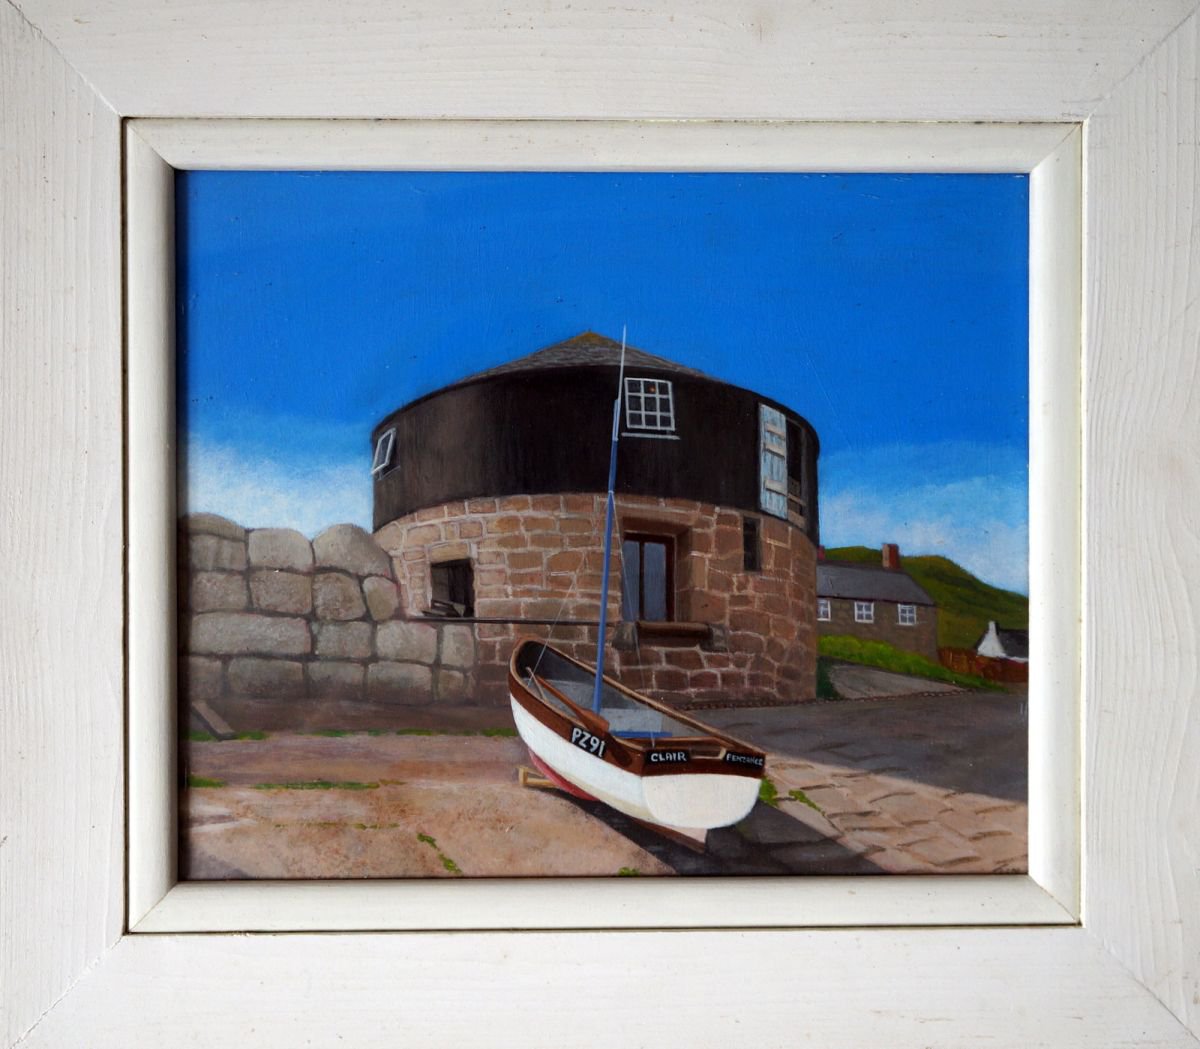 The Roundhouse, Sennen Cove. by Tim Treagust